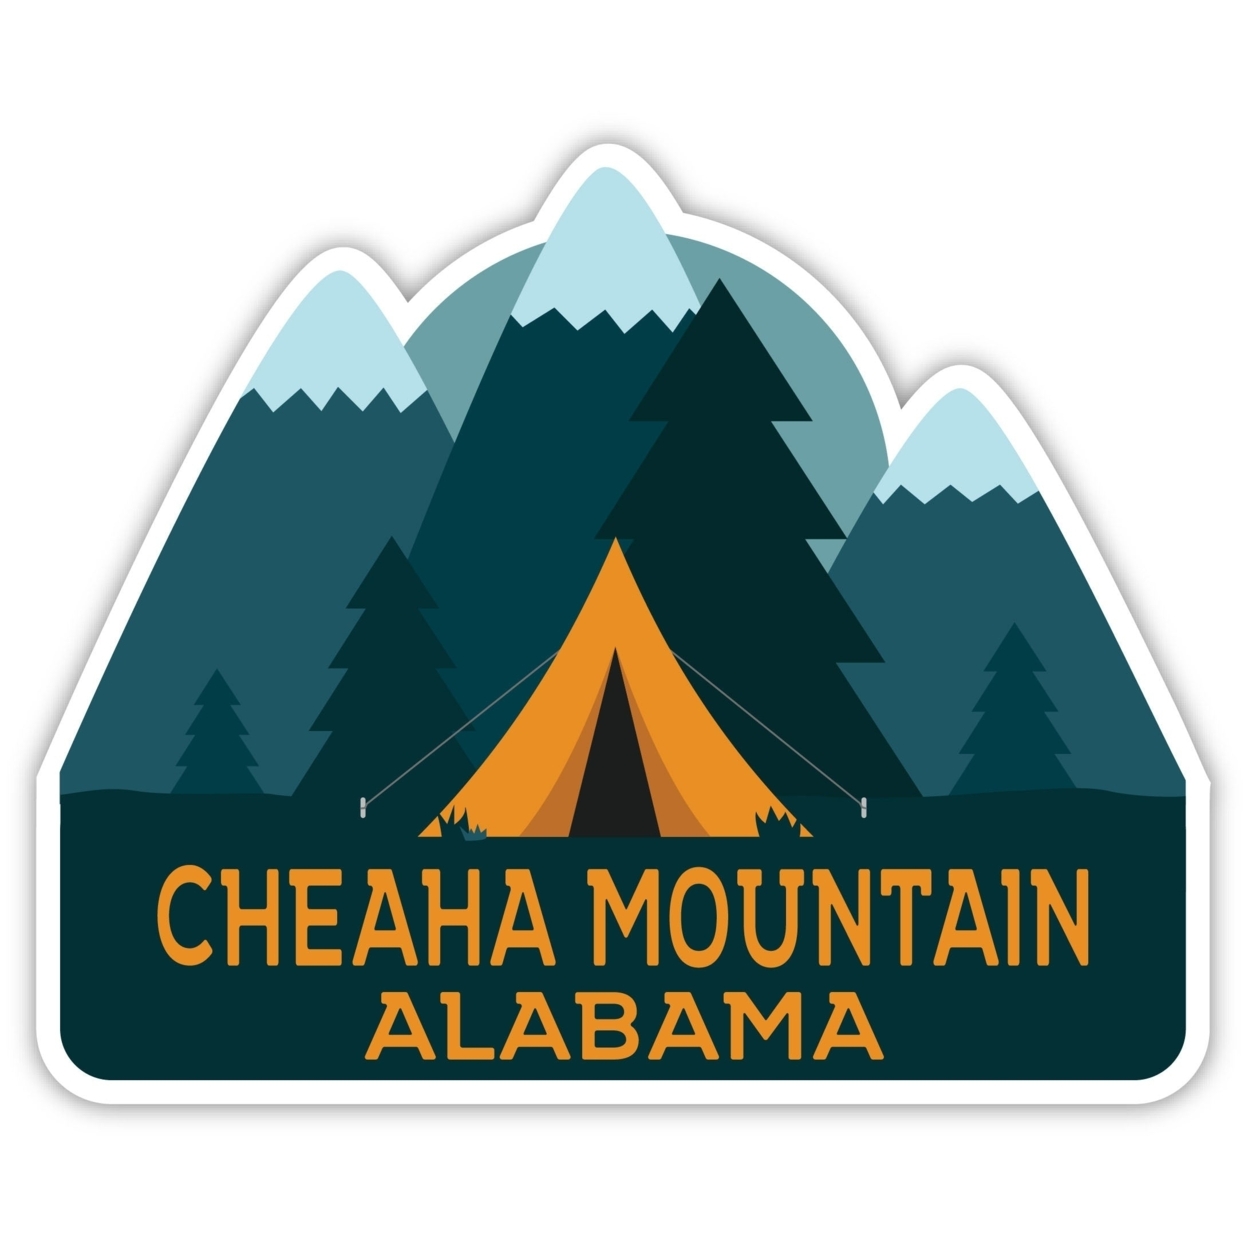 Cheaha Mountain Alabama Souvenir Decorative Stickers (Choose Theme And Size) - 4-Pack, 12-Inch, Great Outdoors